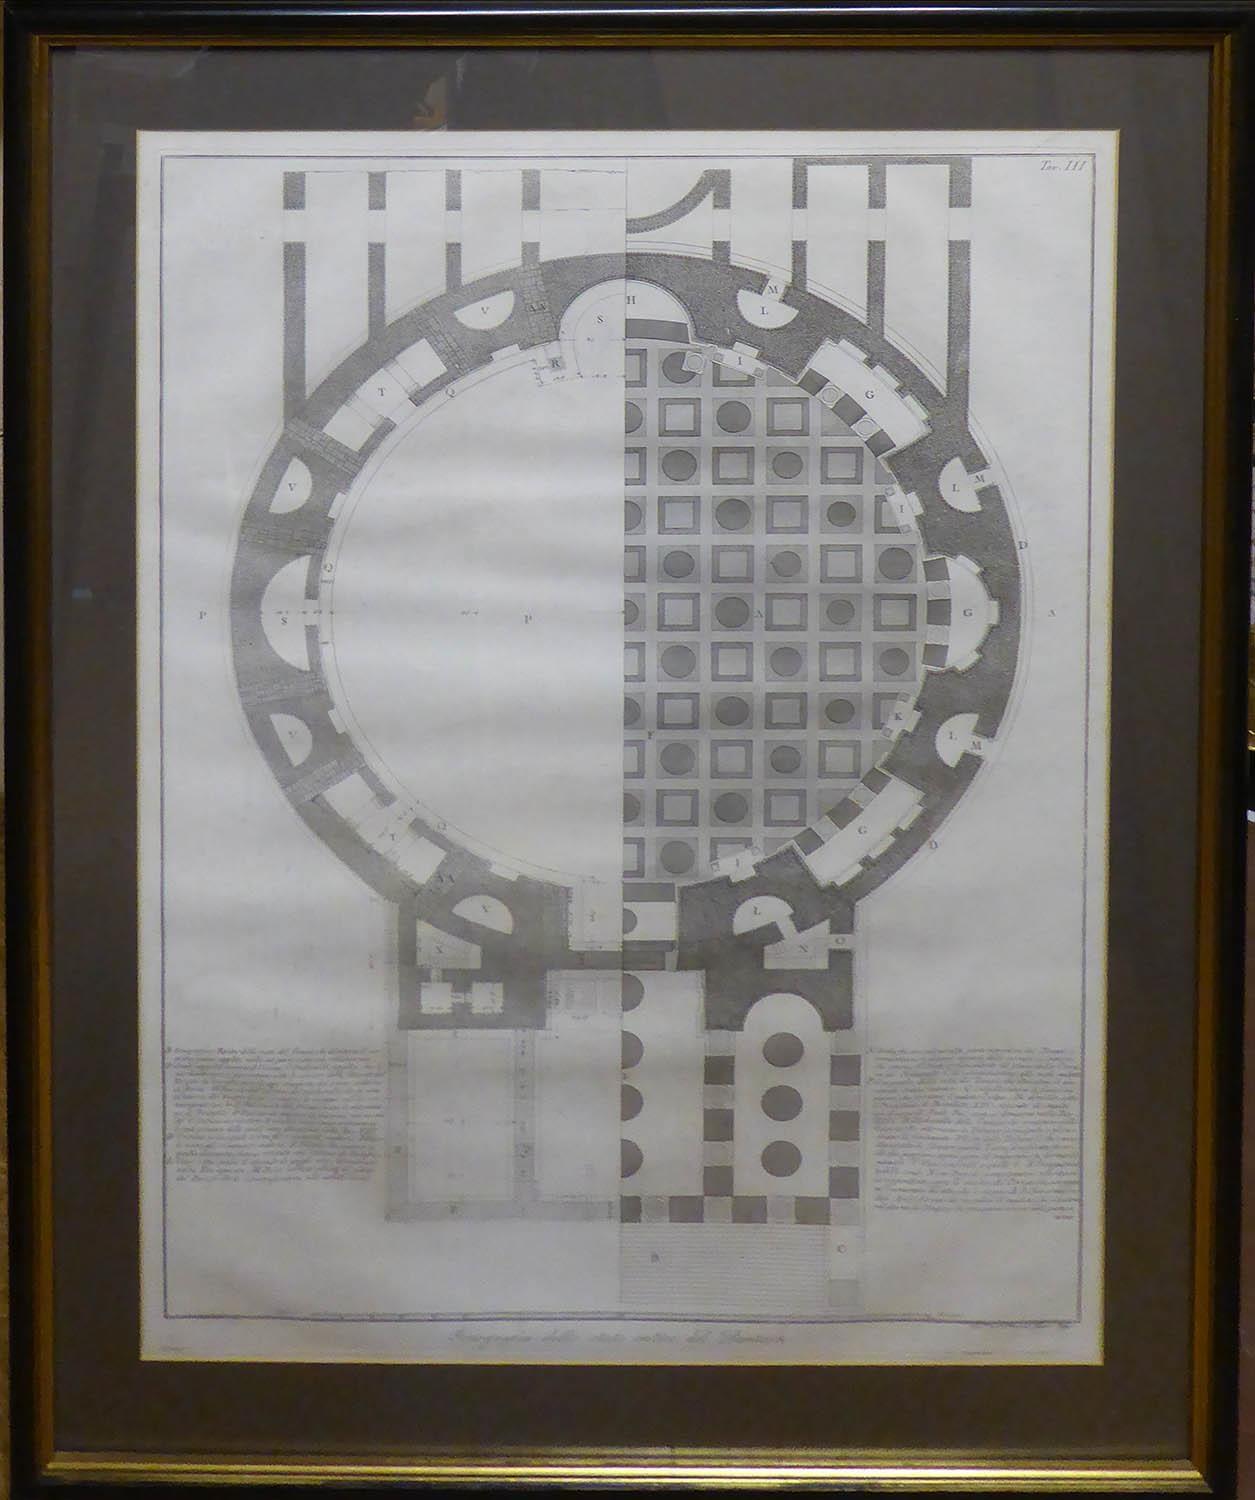 FRANCESCO PIRANESI 'Iconography of the old state of the Pantheon in Rome', original 1790